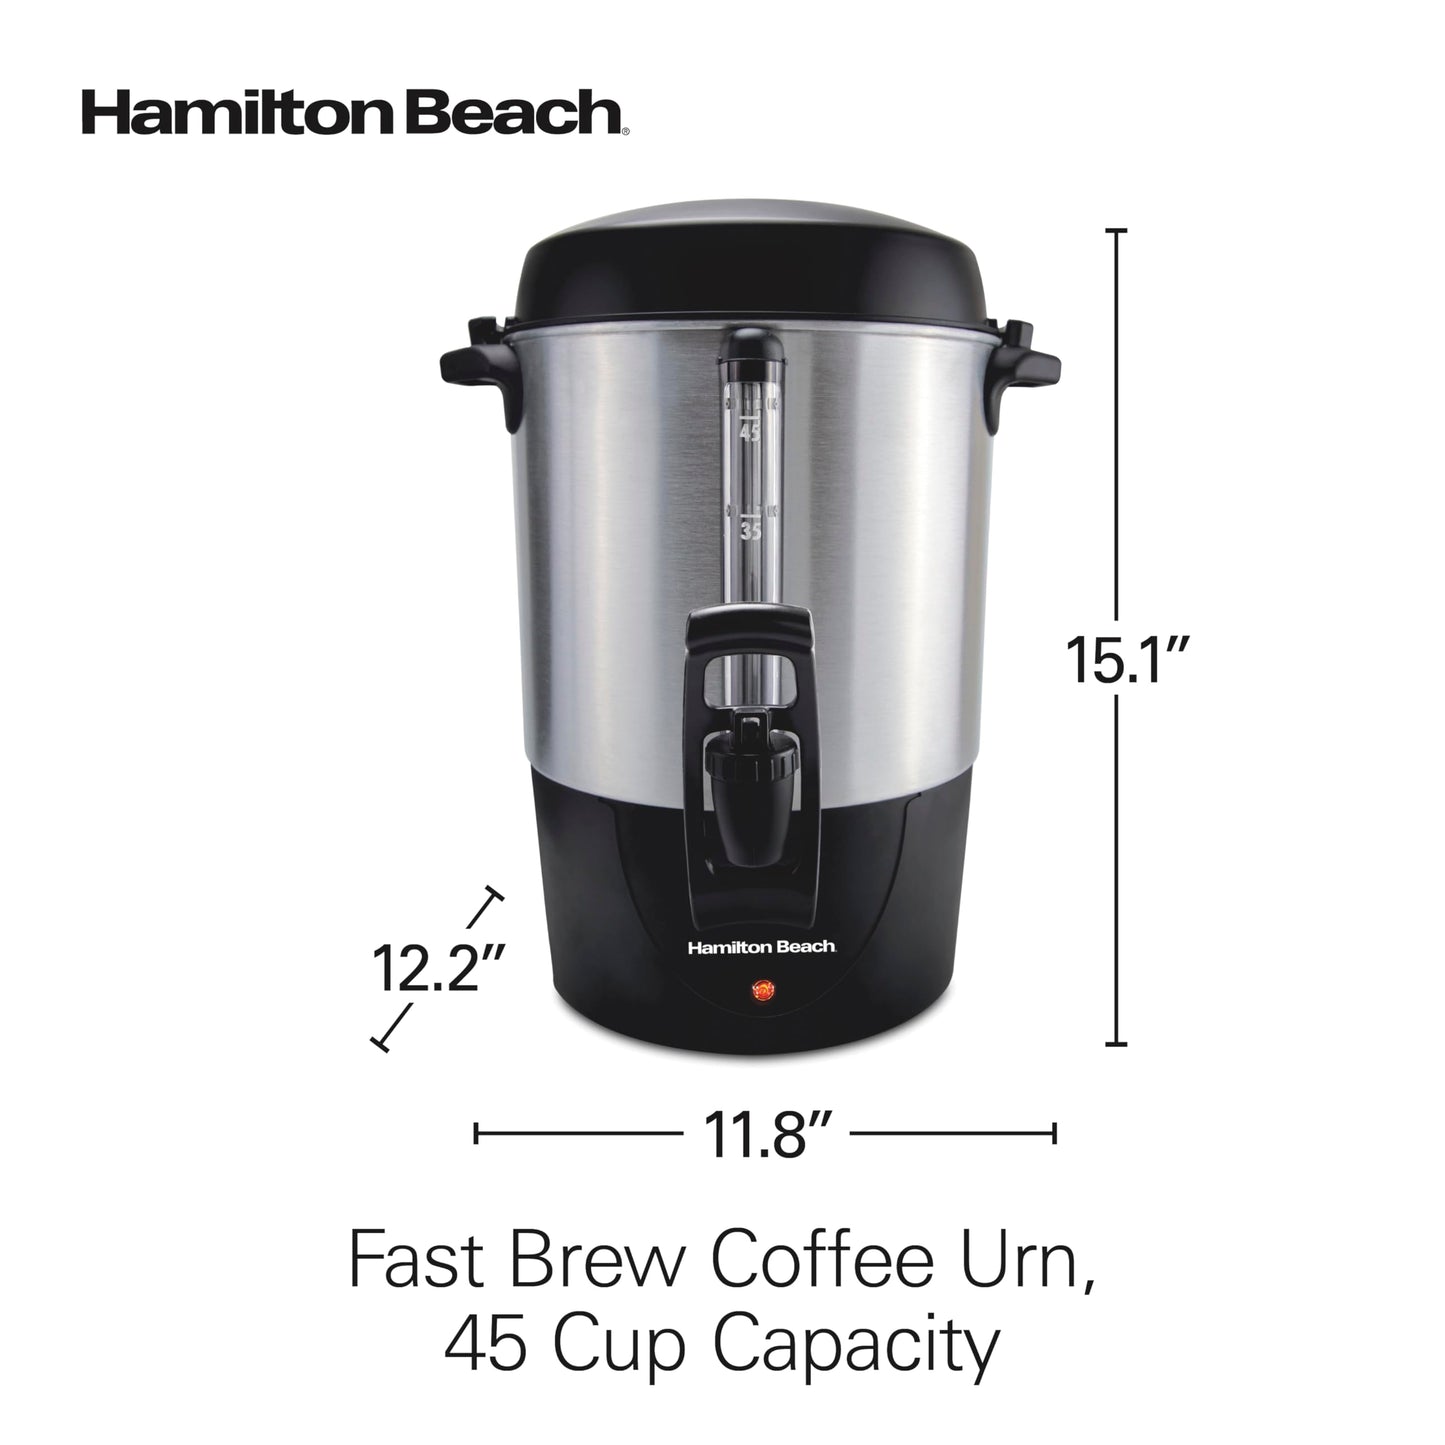 Hamilton Beach 45 Cup Fast Brew Coffee Urn and Hot Beverage Dispenser, 40521 - Like New